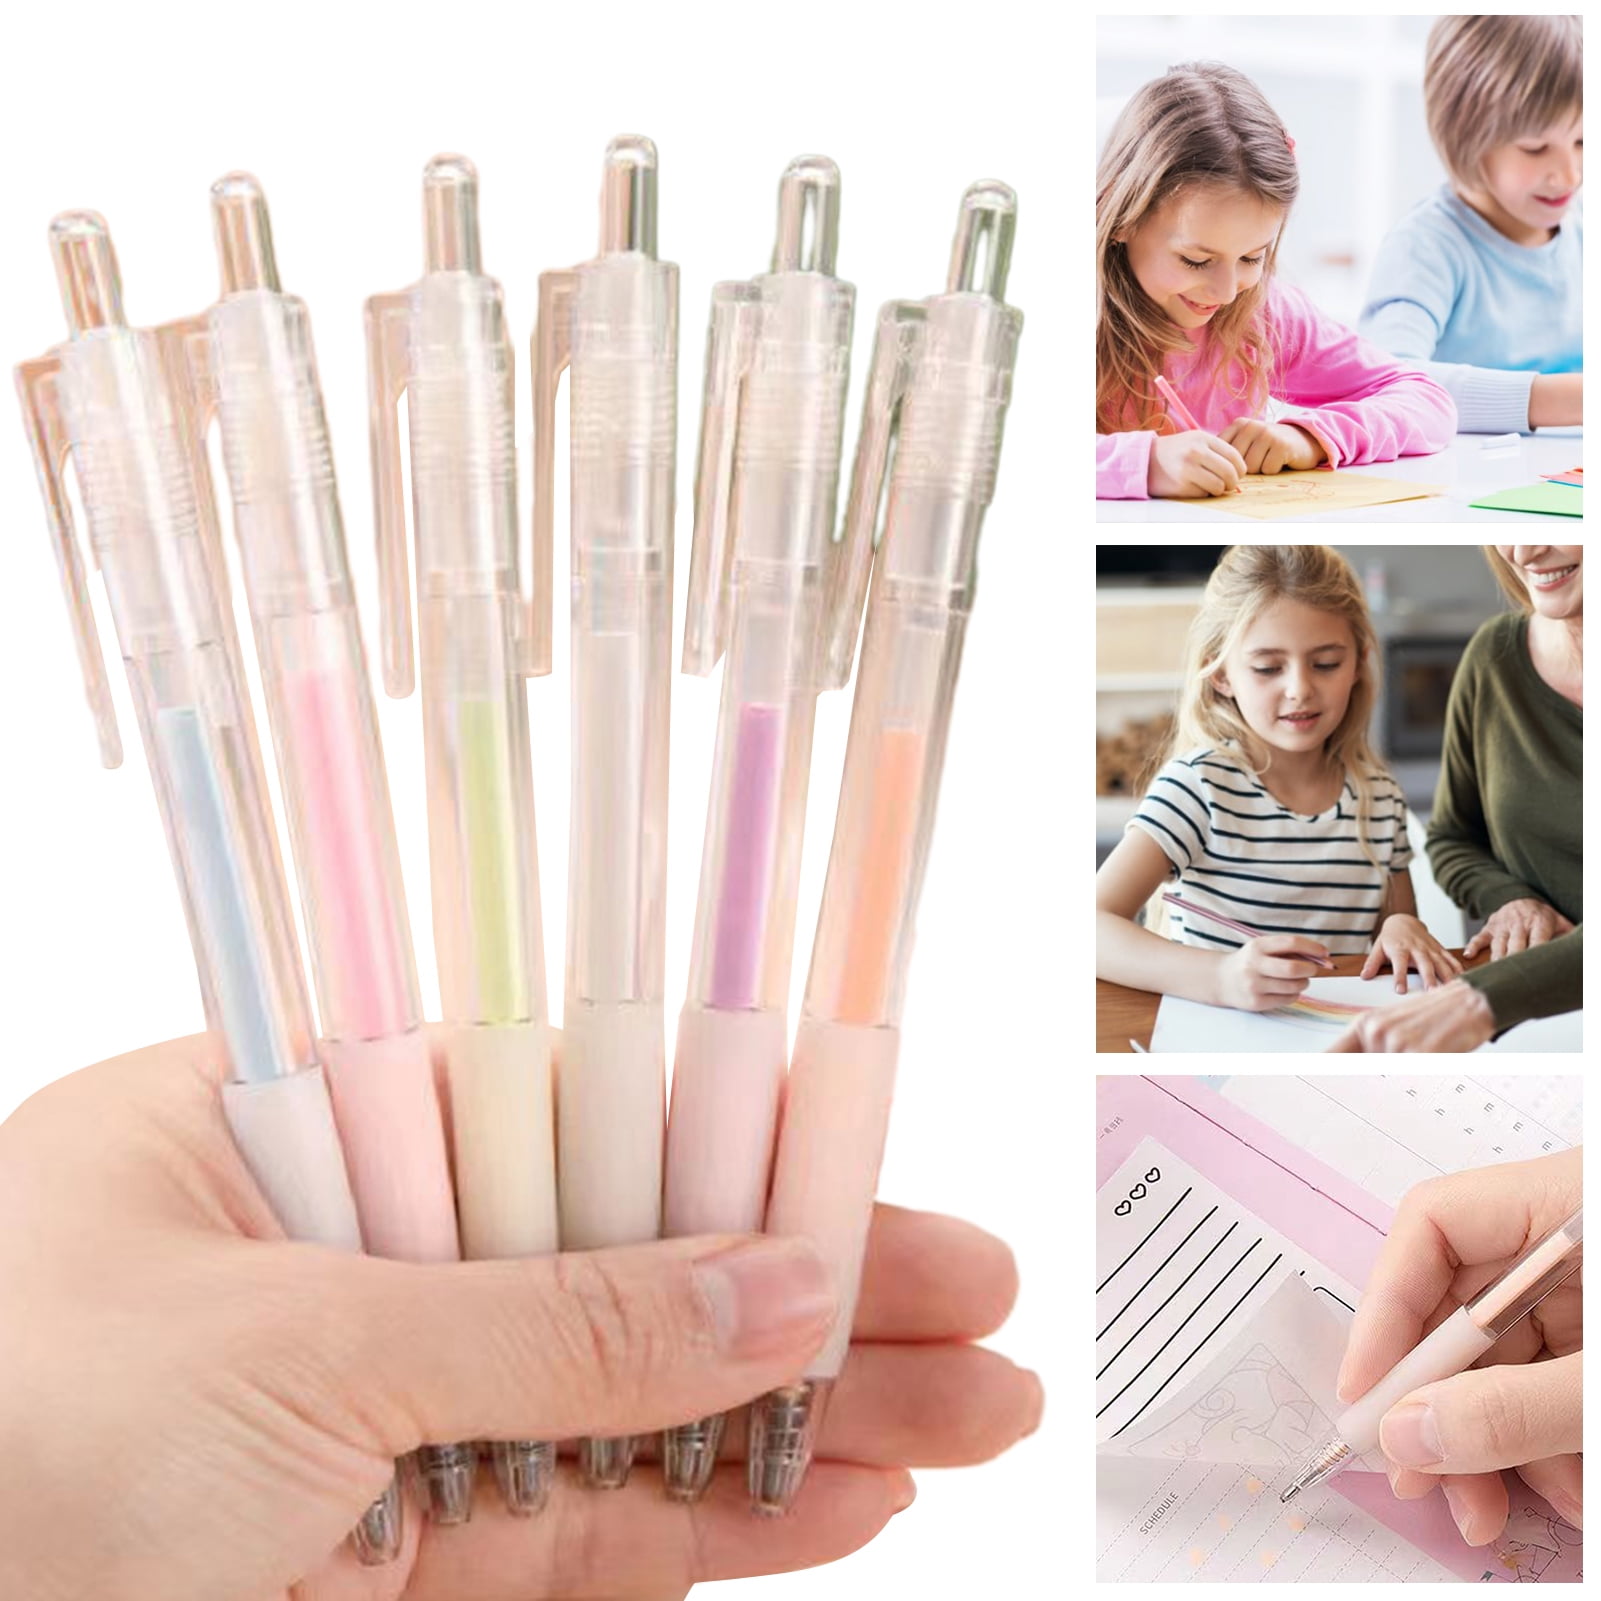 Glue Pens For Crafting Colorful Glue Pens For Card Making 6 Pcs Crafting  Fabric Pen DIY Hand Account Pen School Supplies For - AliExpress